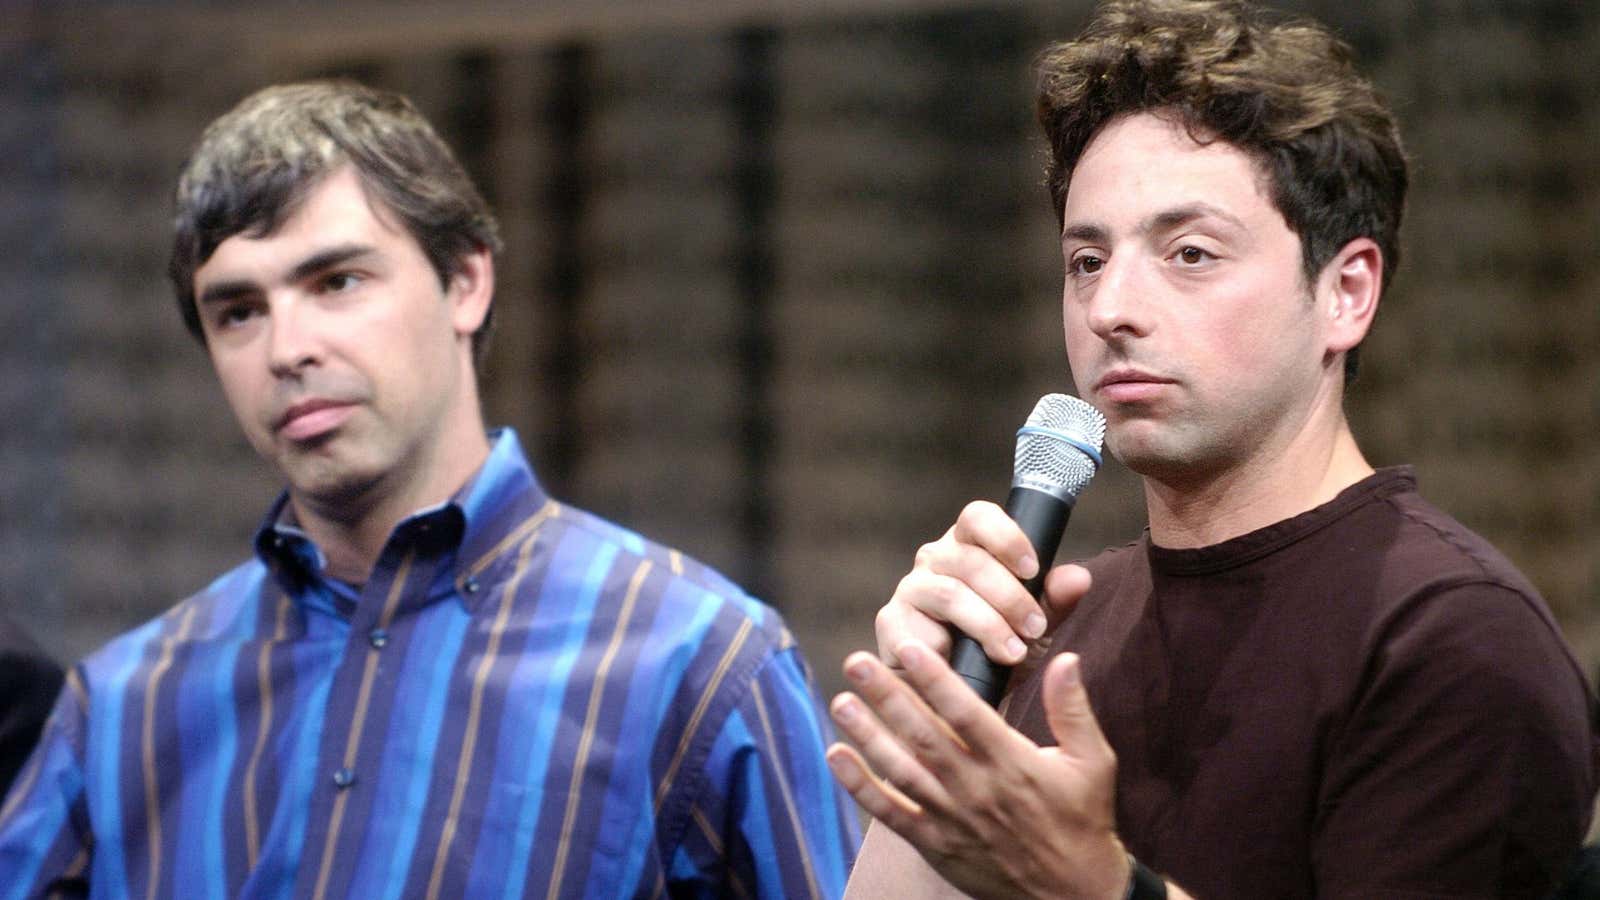 Google co-founders Sergey Brin (right) and Larry Page, in 2007.